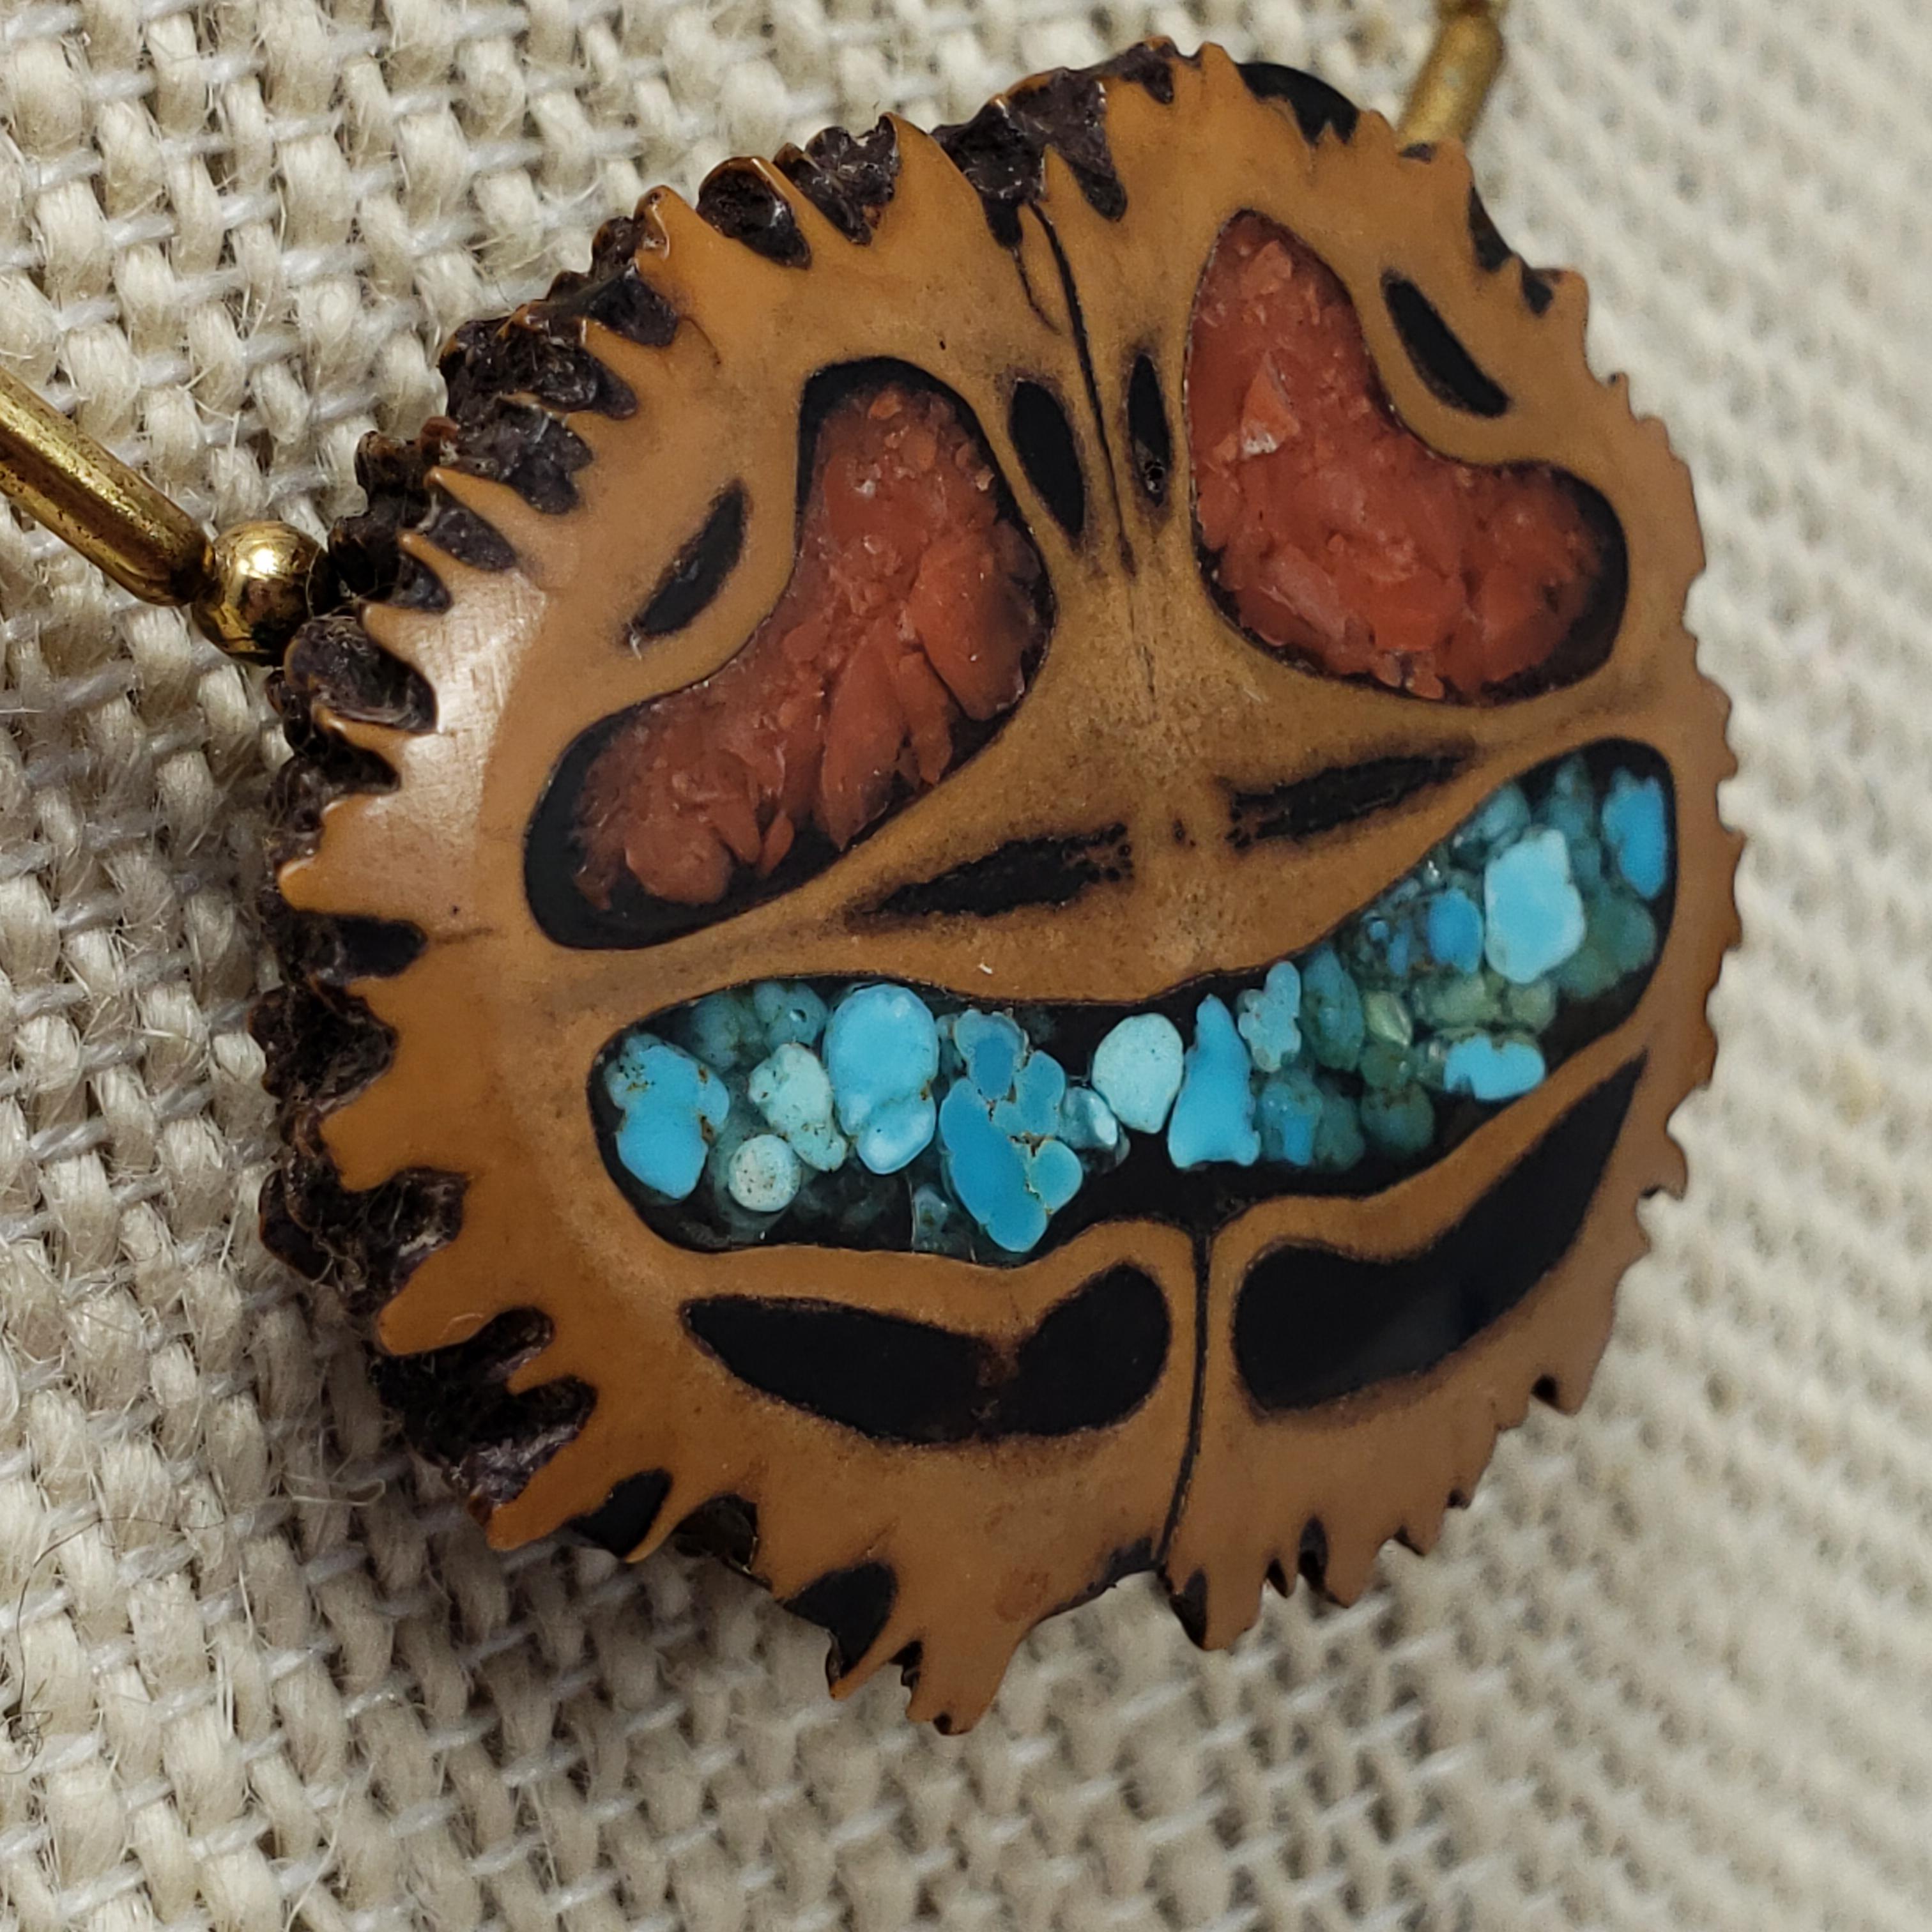 Native American Pendant Necklace Clip On Earrings in Gold, Turquoise, Coral In Fair Condition For Sale In Milford, DE